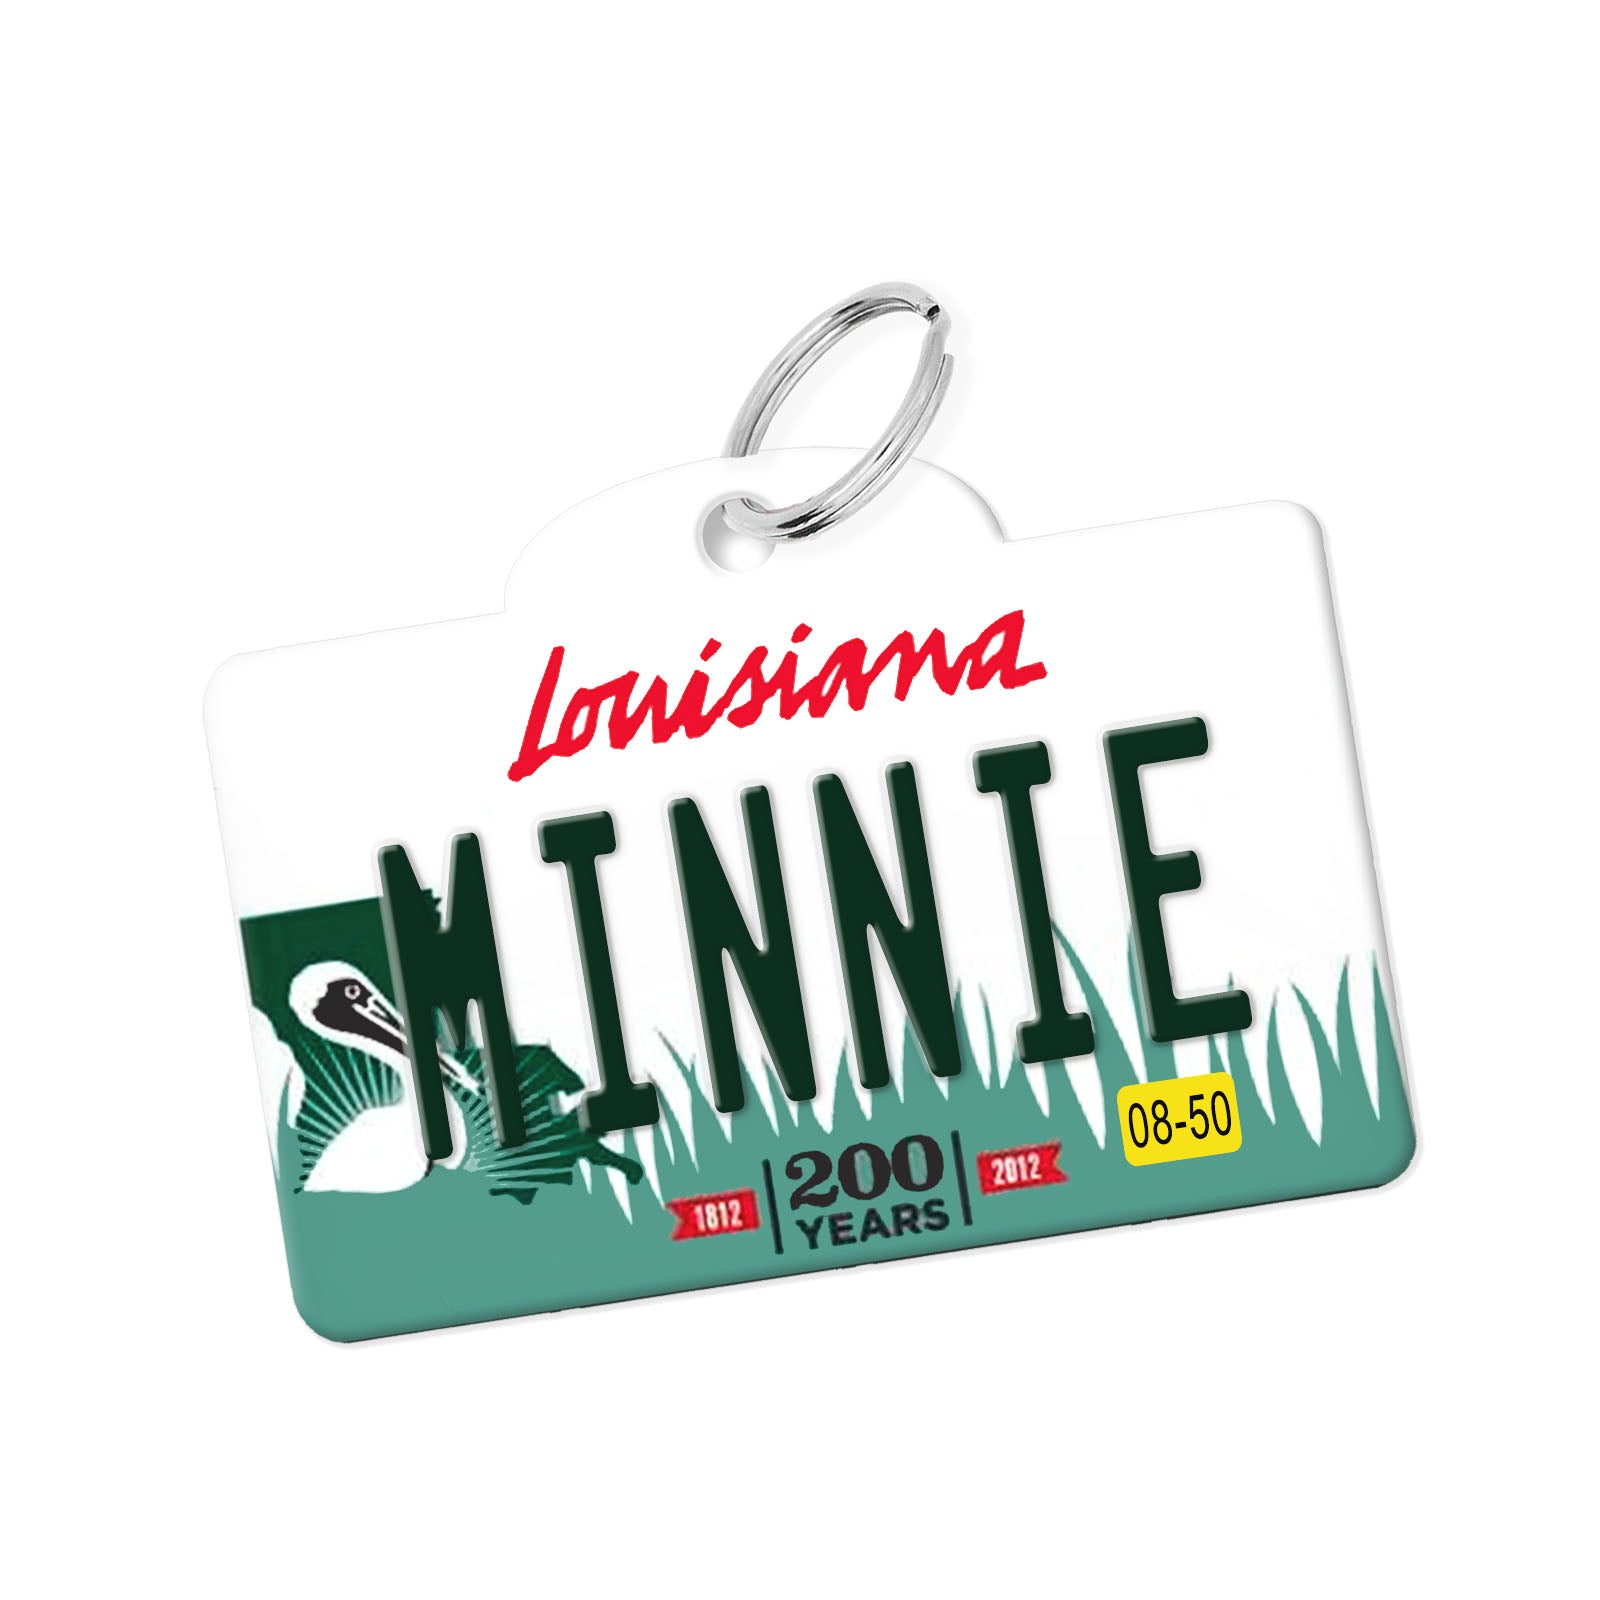 Personalized Louisiana License Plate Keychain Tag Vintage 